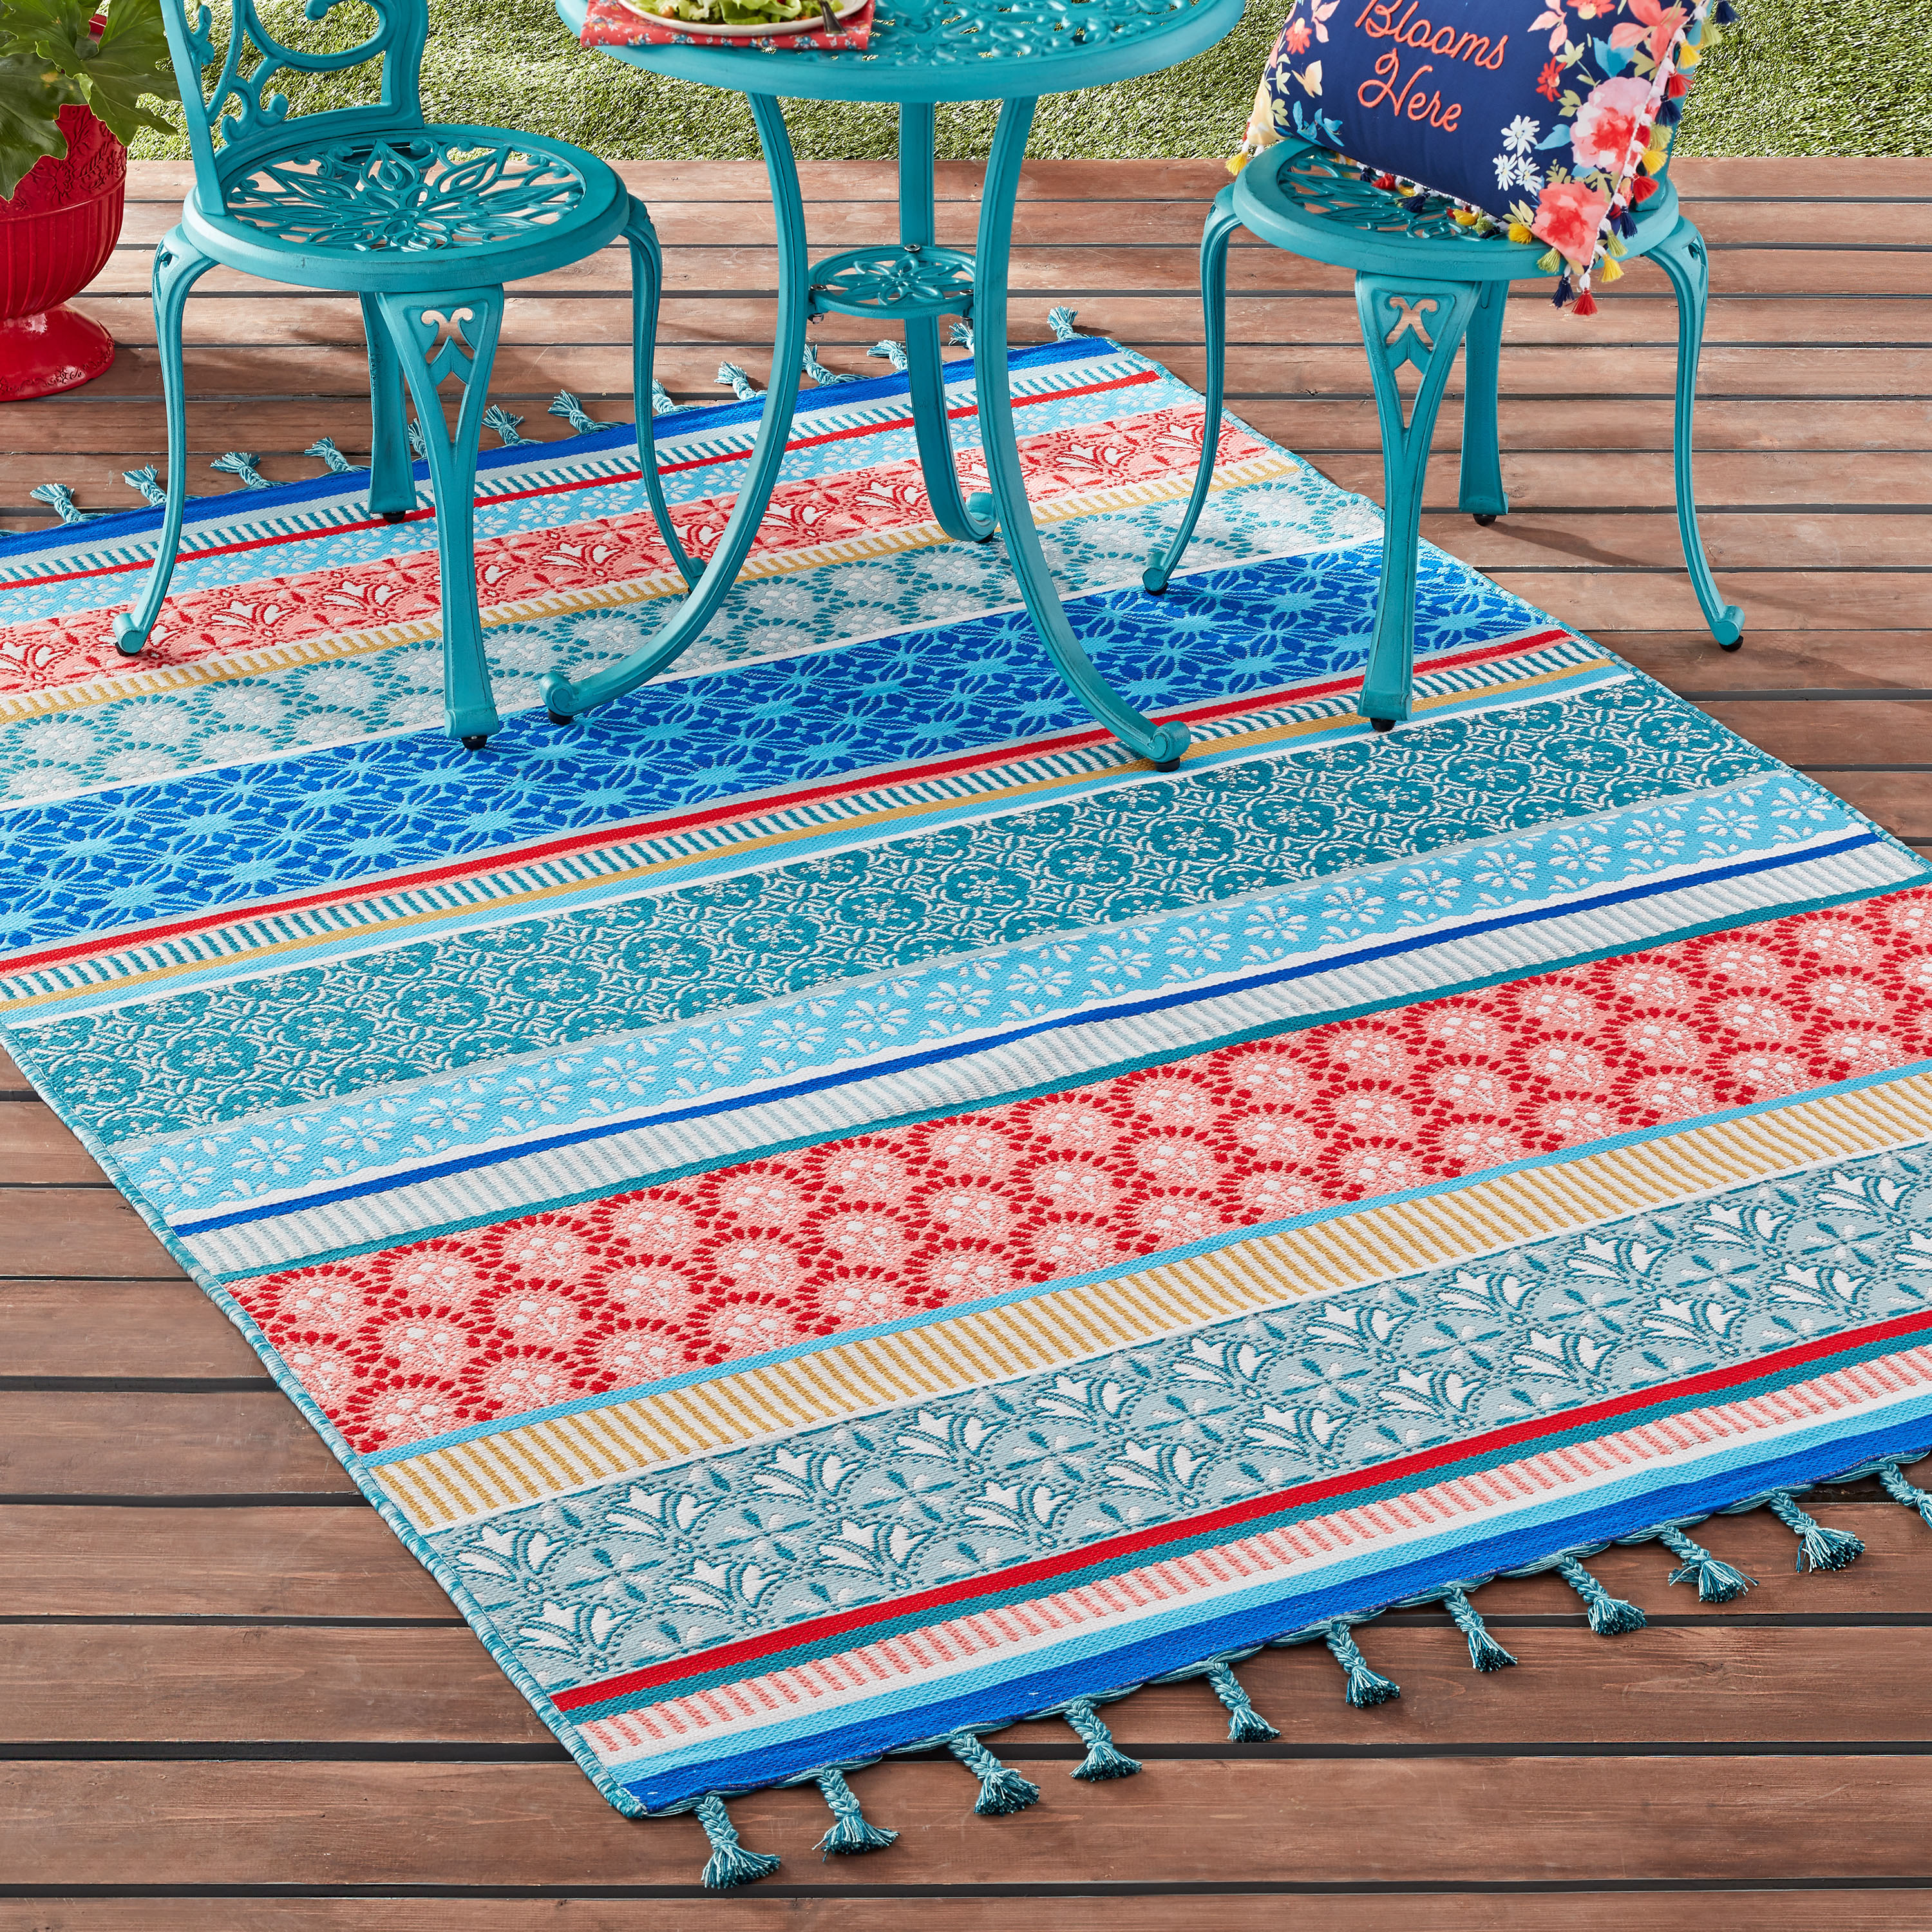 The Pioneer Woman 5' x 7' Multi-Color Outdoor Rug - image 3 of 8